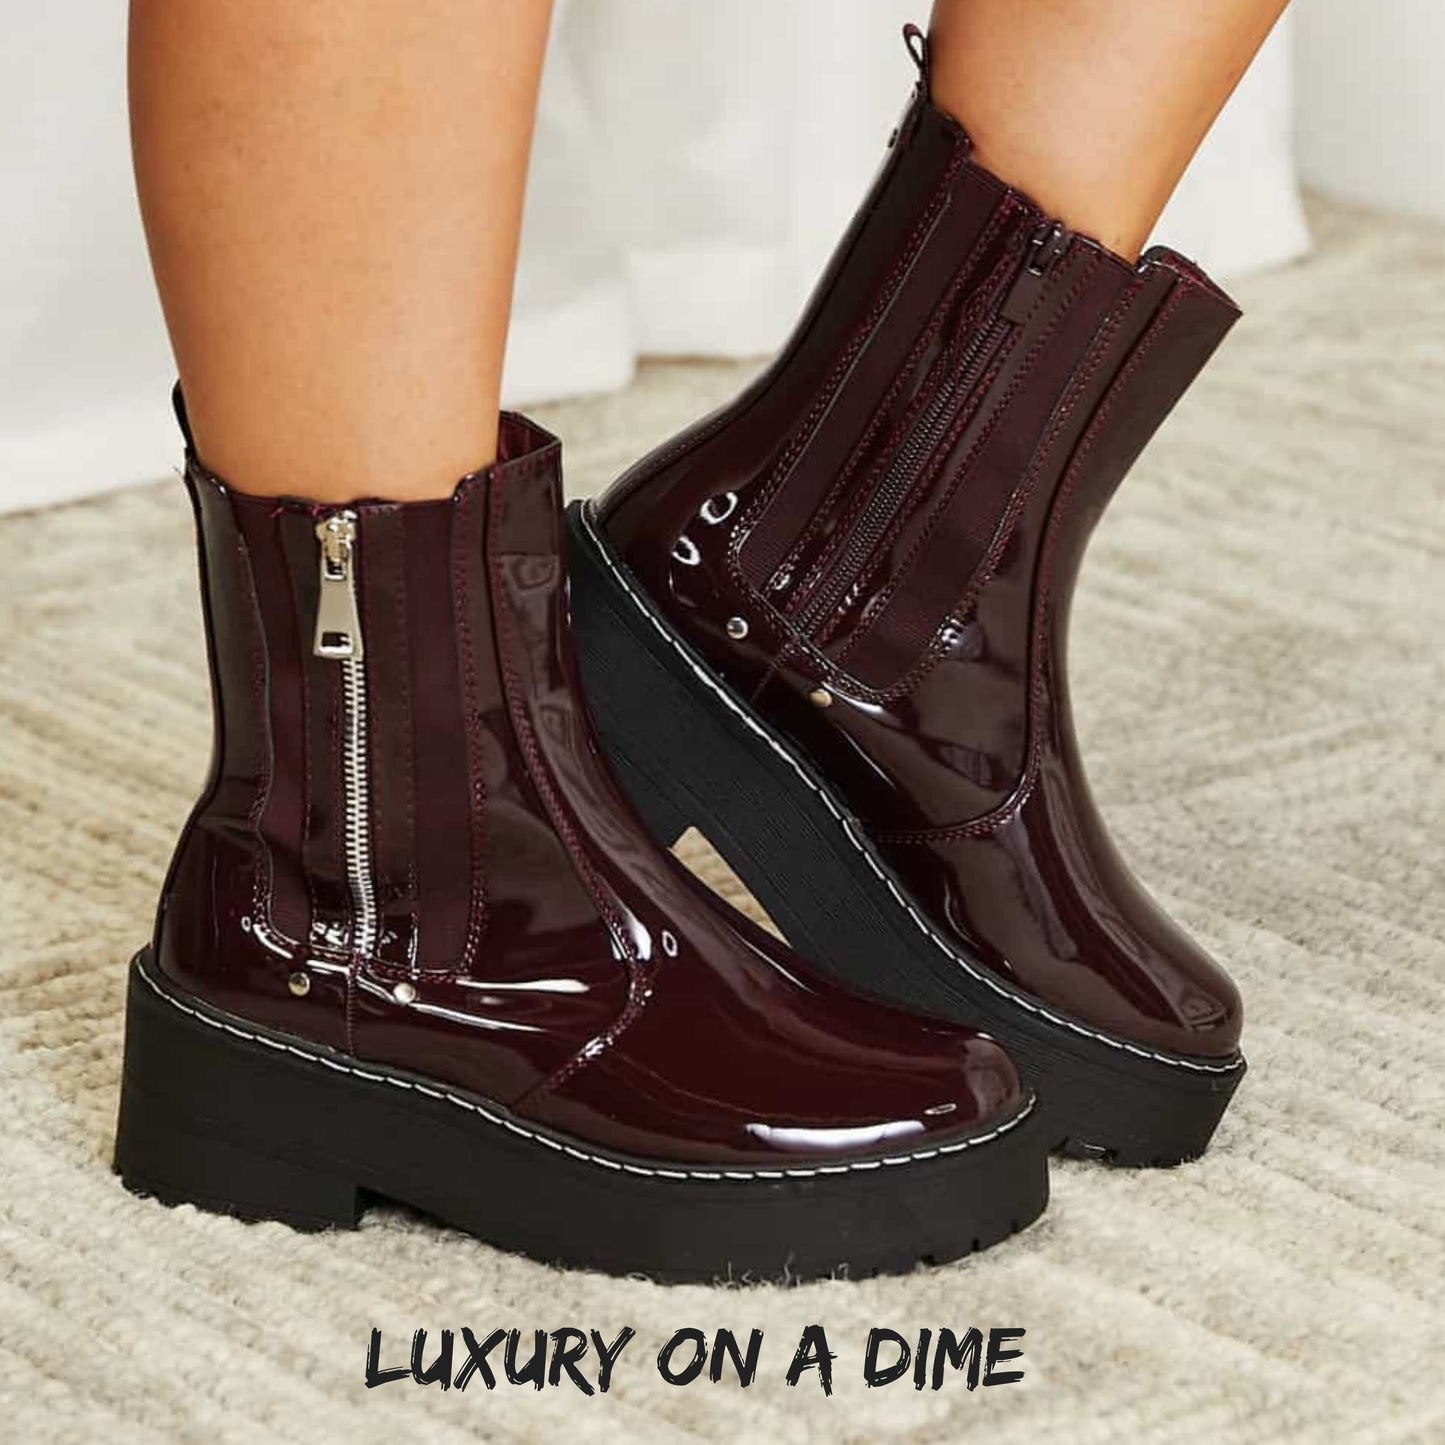 Platform Boots Side Zip Vegan Patent Leather Round Toe Shoes Forever Link